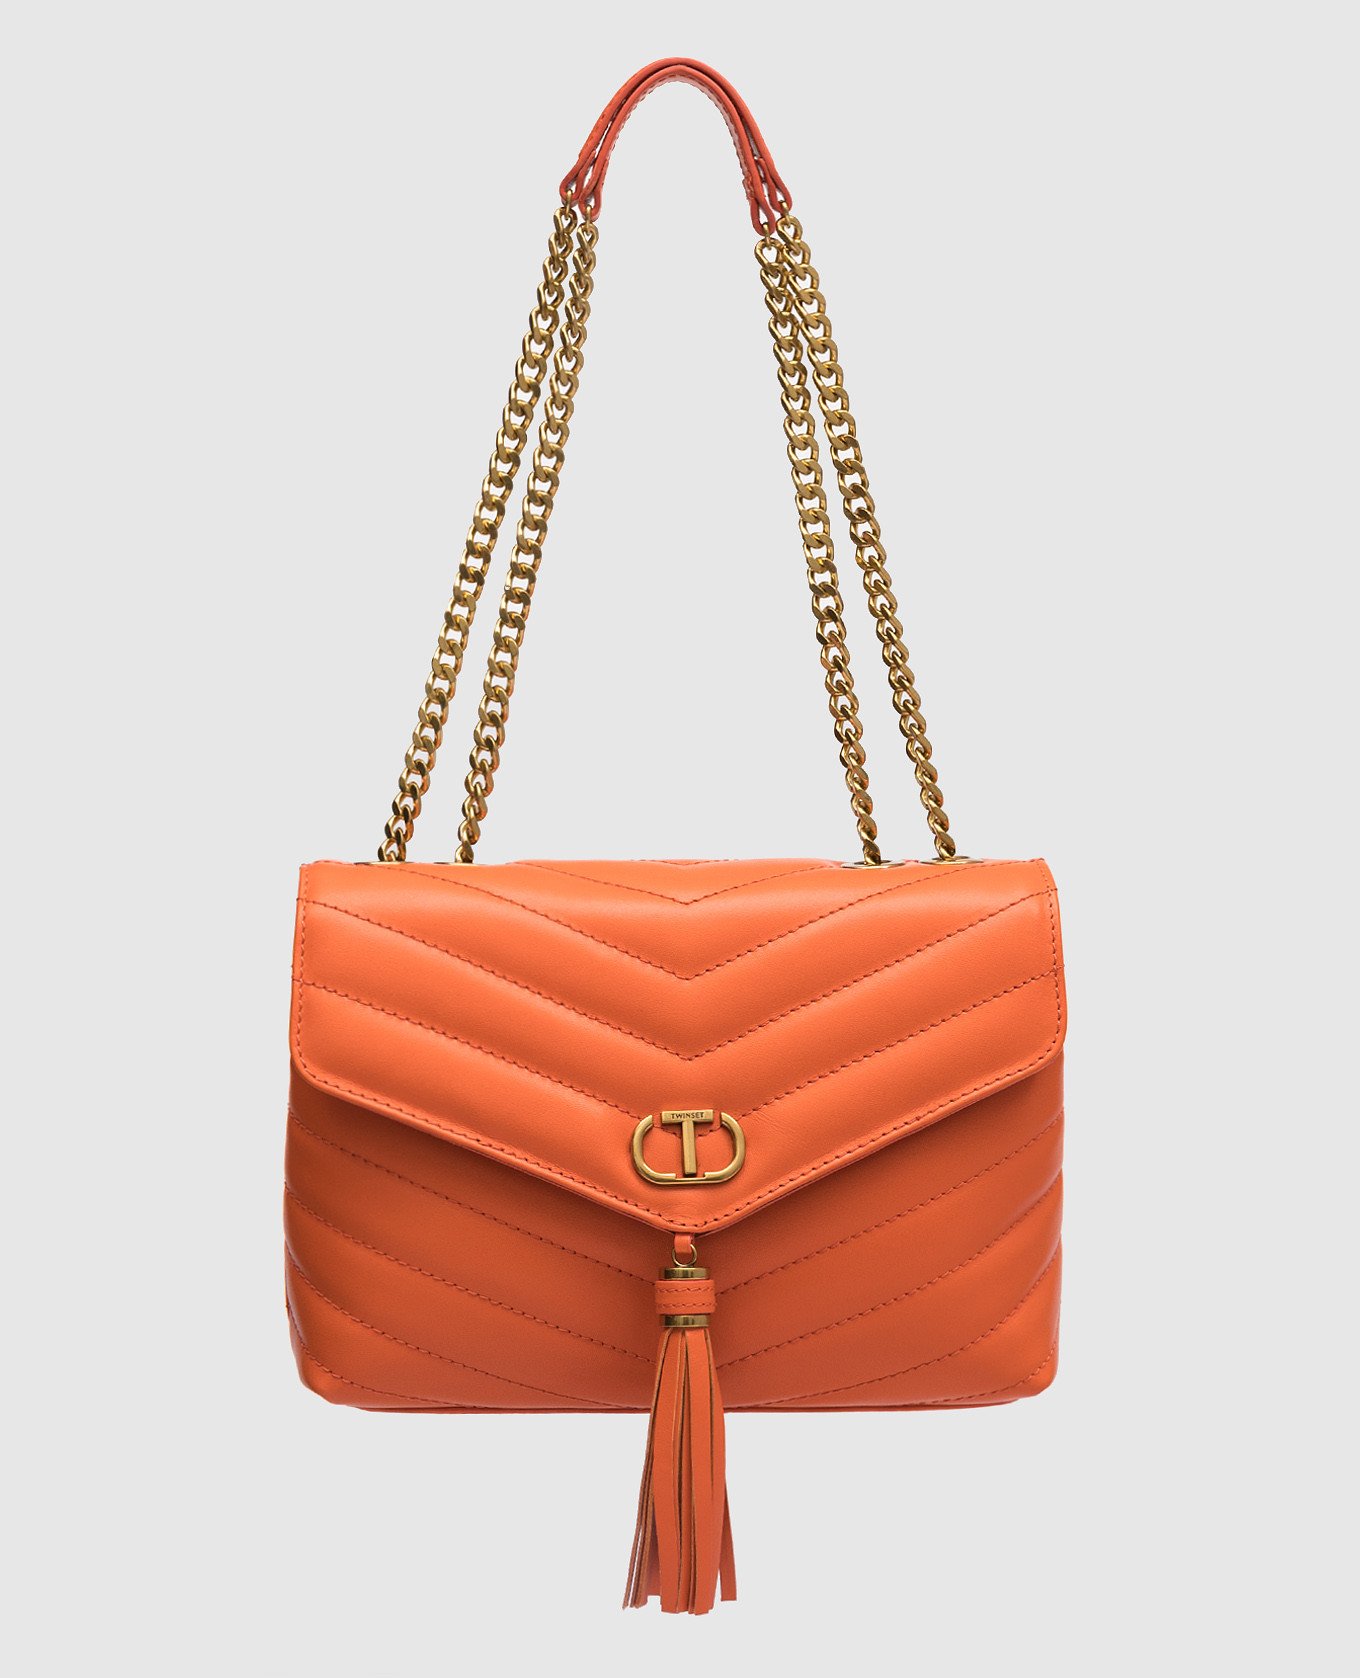 Dreamy Orange Leather Messenger Bag with Oval T Logo